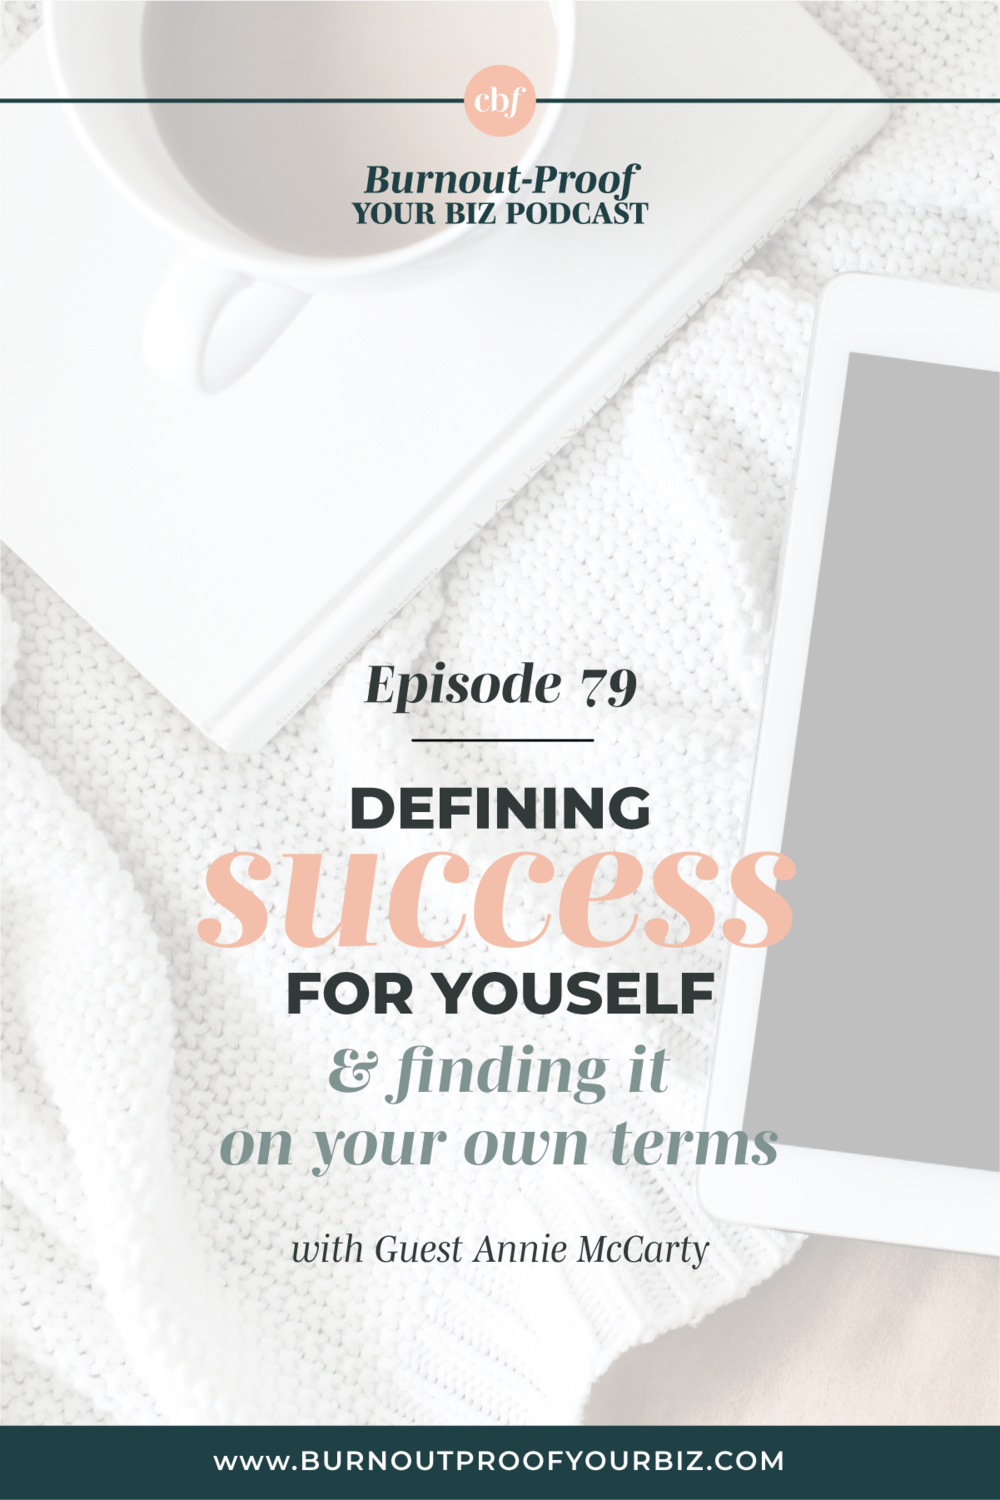 Burnout-Proof Your Biz Podcast with Chelsea B Foster | Episode 079 - Designing your business to fit your life through planning, executing, and systems with guest Annie McCarty